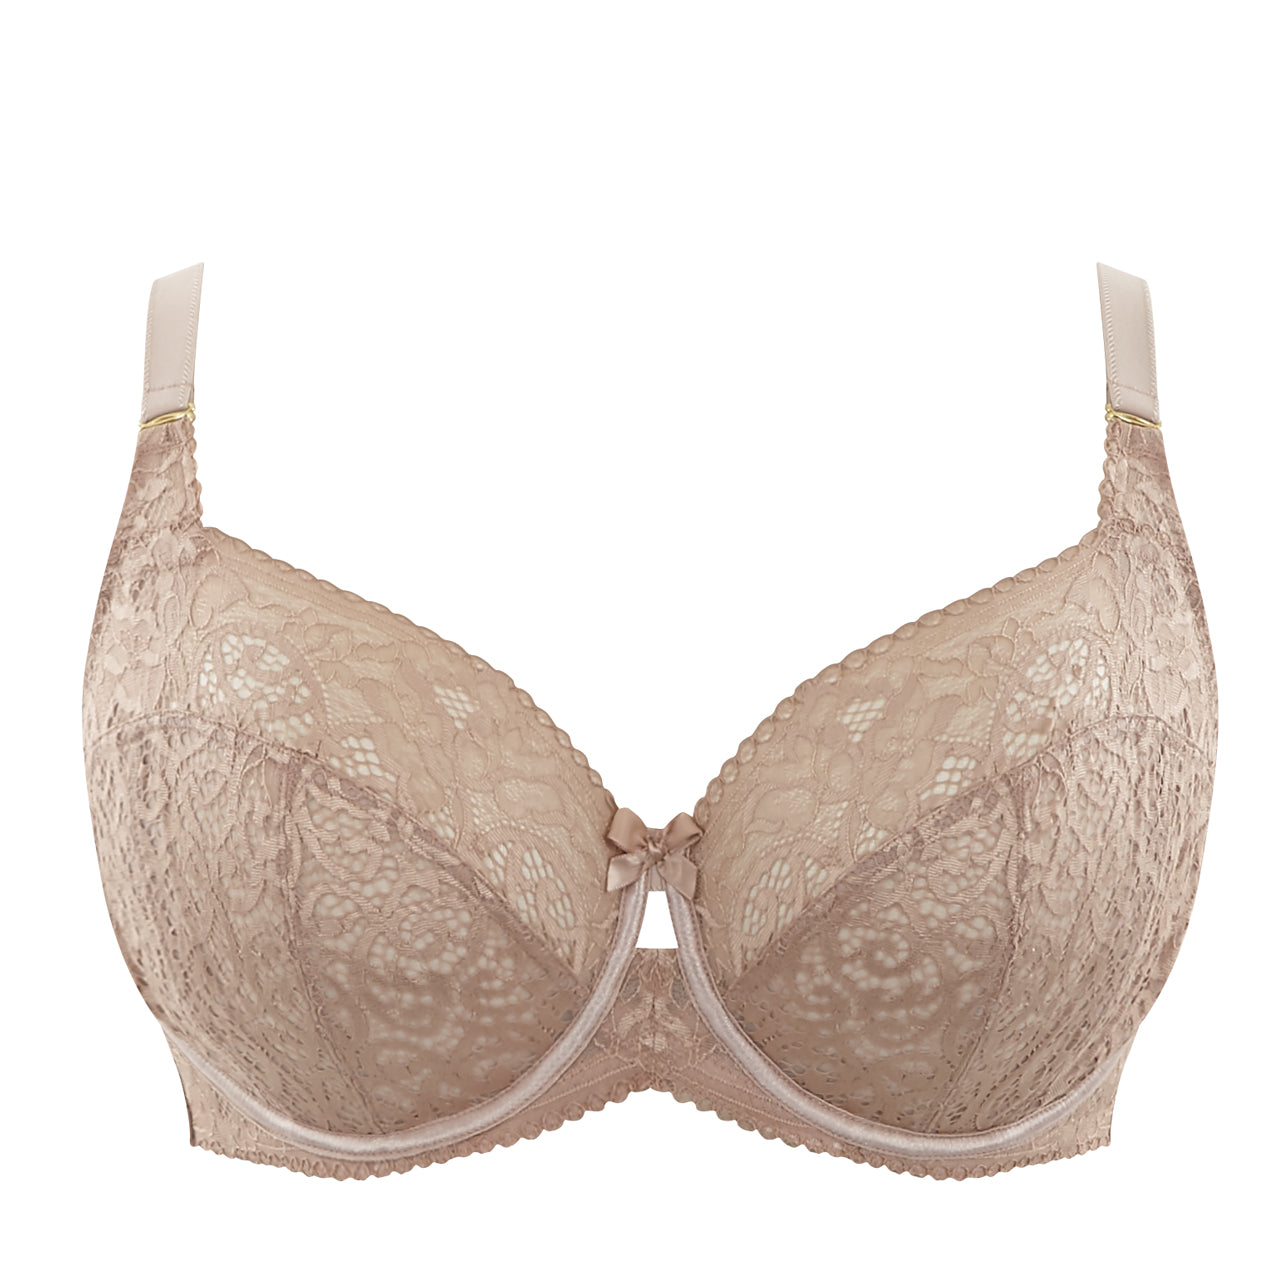 40G Bra Size in G Cup Sizes by Panache Full Cup and Three Section Cup